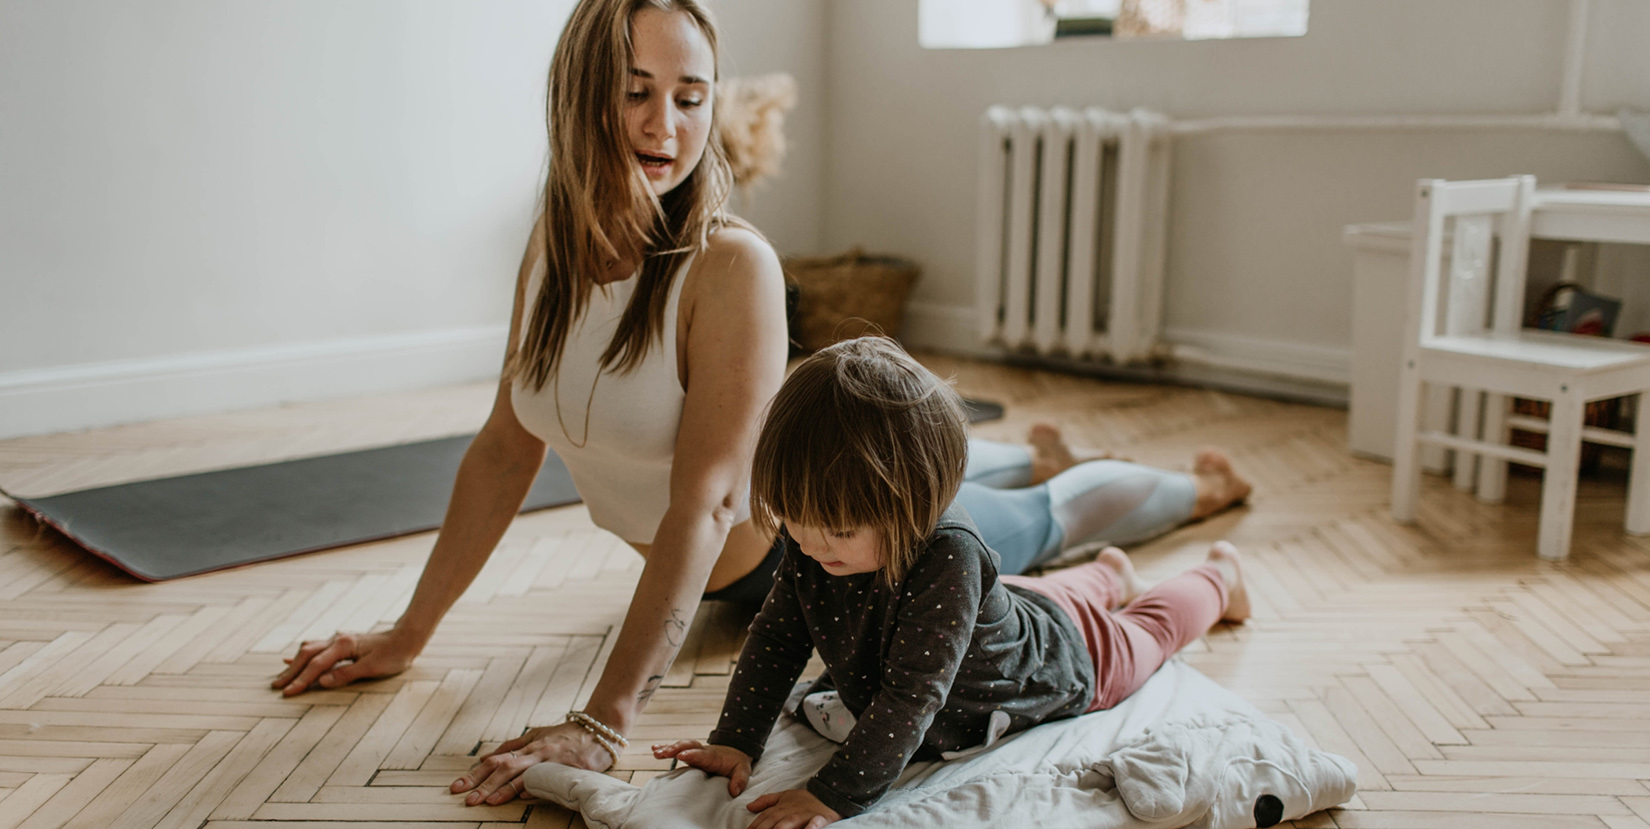 Mom stretching at home with child - Social distancing can bring feelings of anxiety and uncertainty, especially when you’re alone with your thoughts - here's how you can stay sane right now!